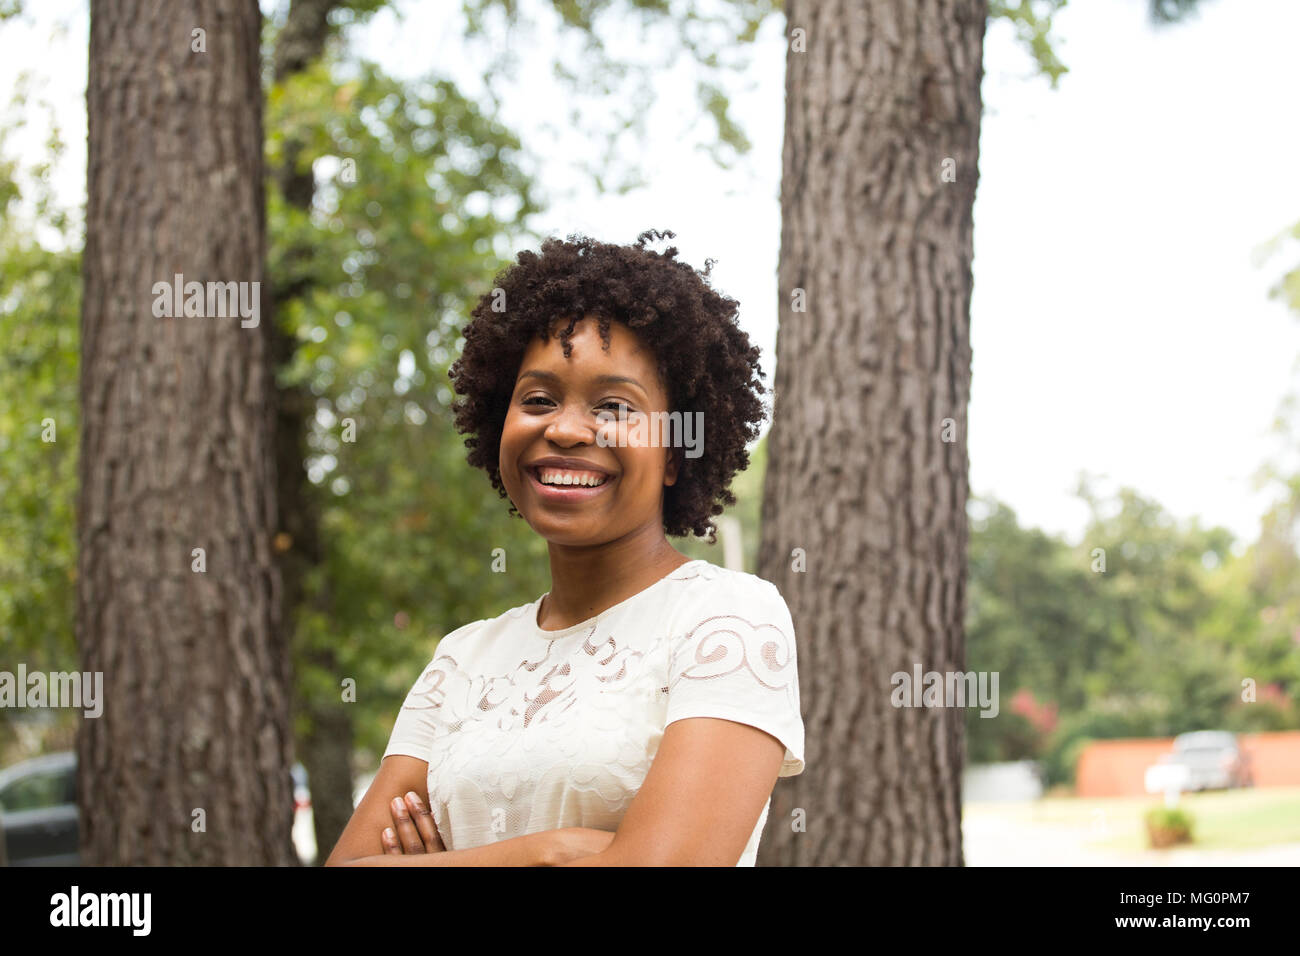 Young happy African American woman smiling. Stock Photo